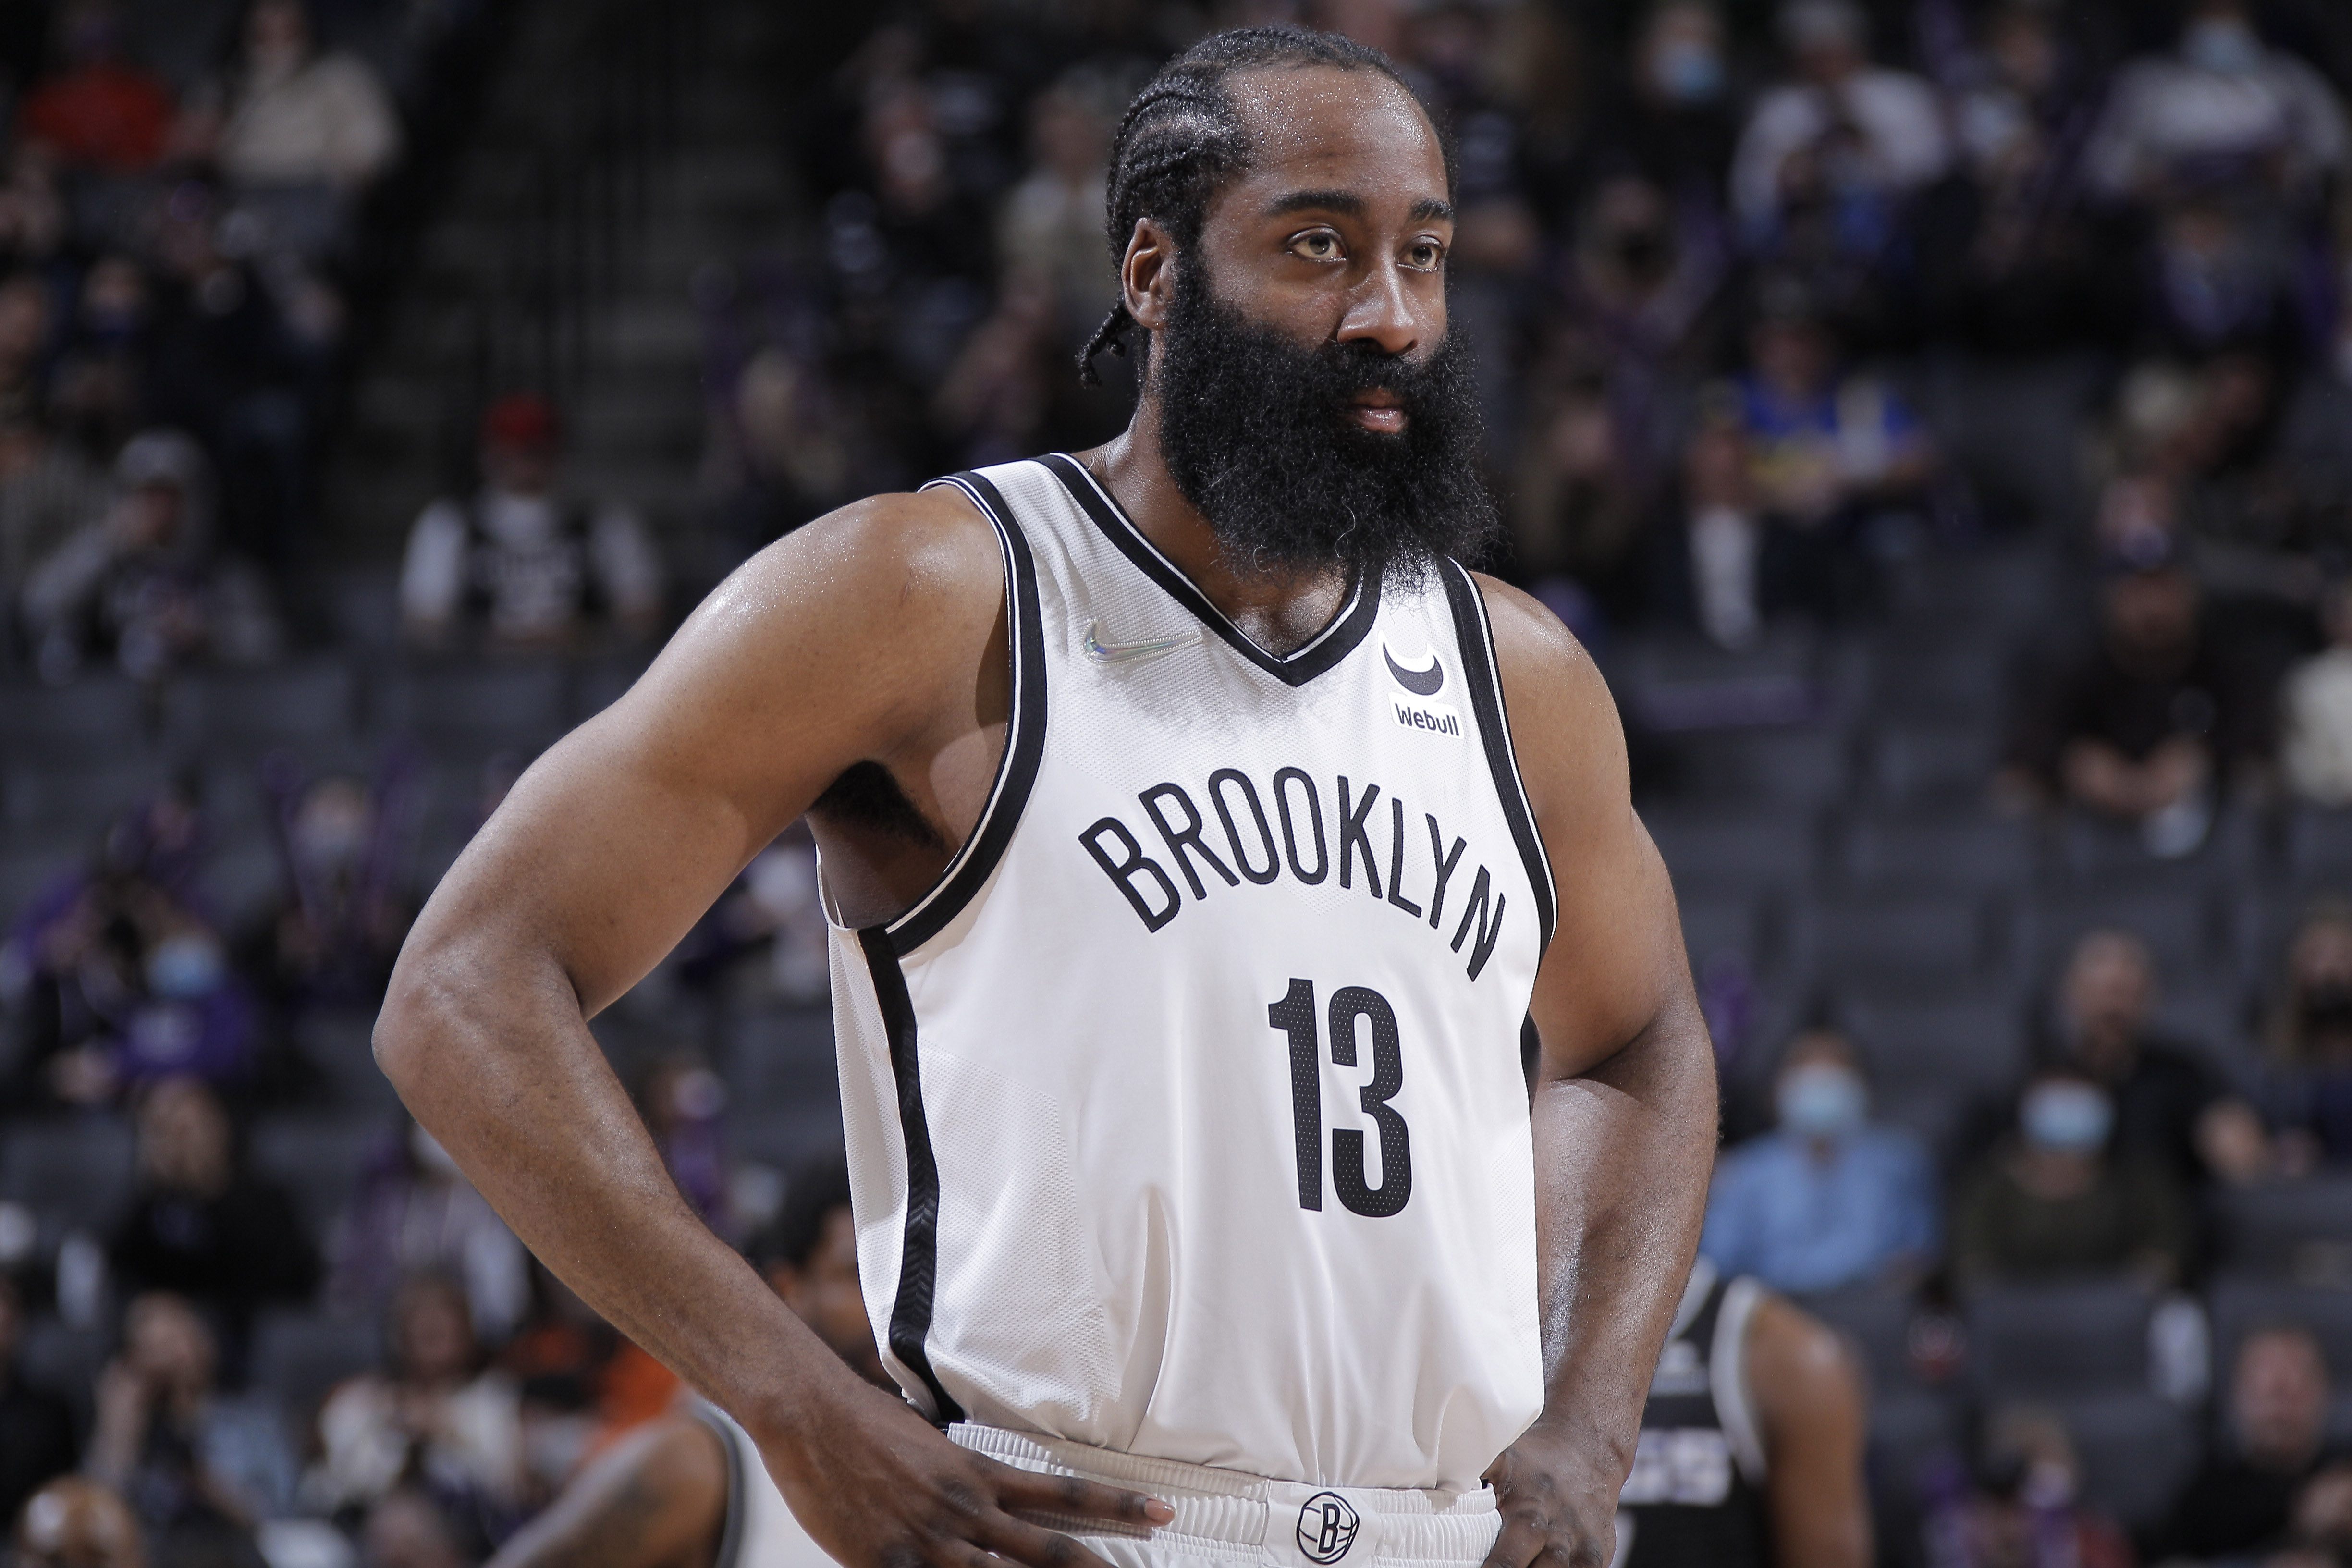 What Number Does James Harden Wear?